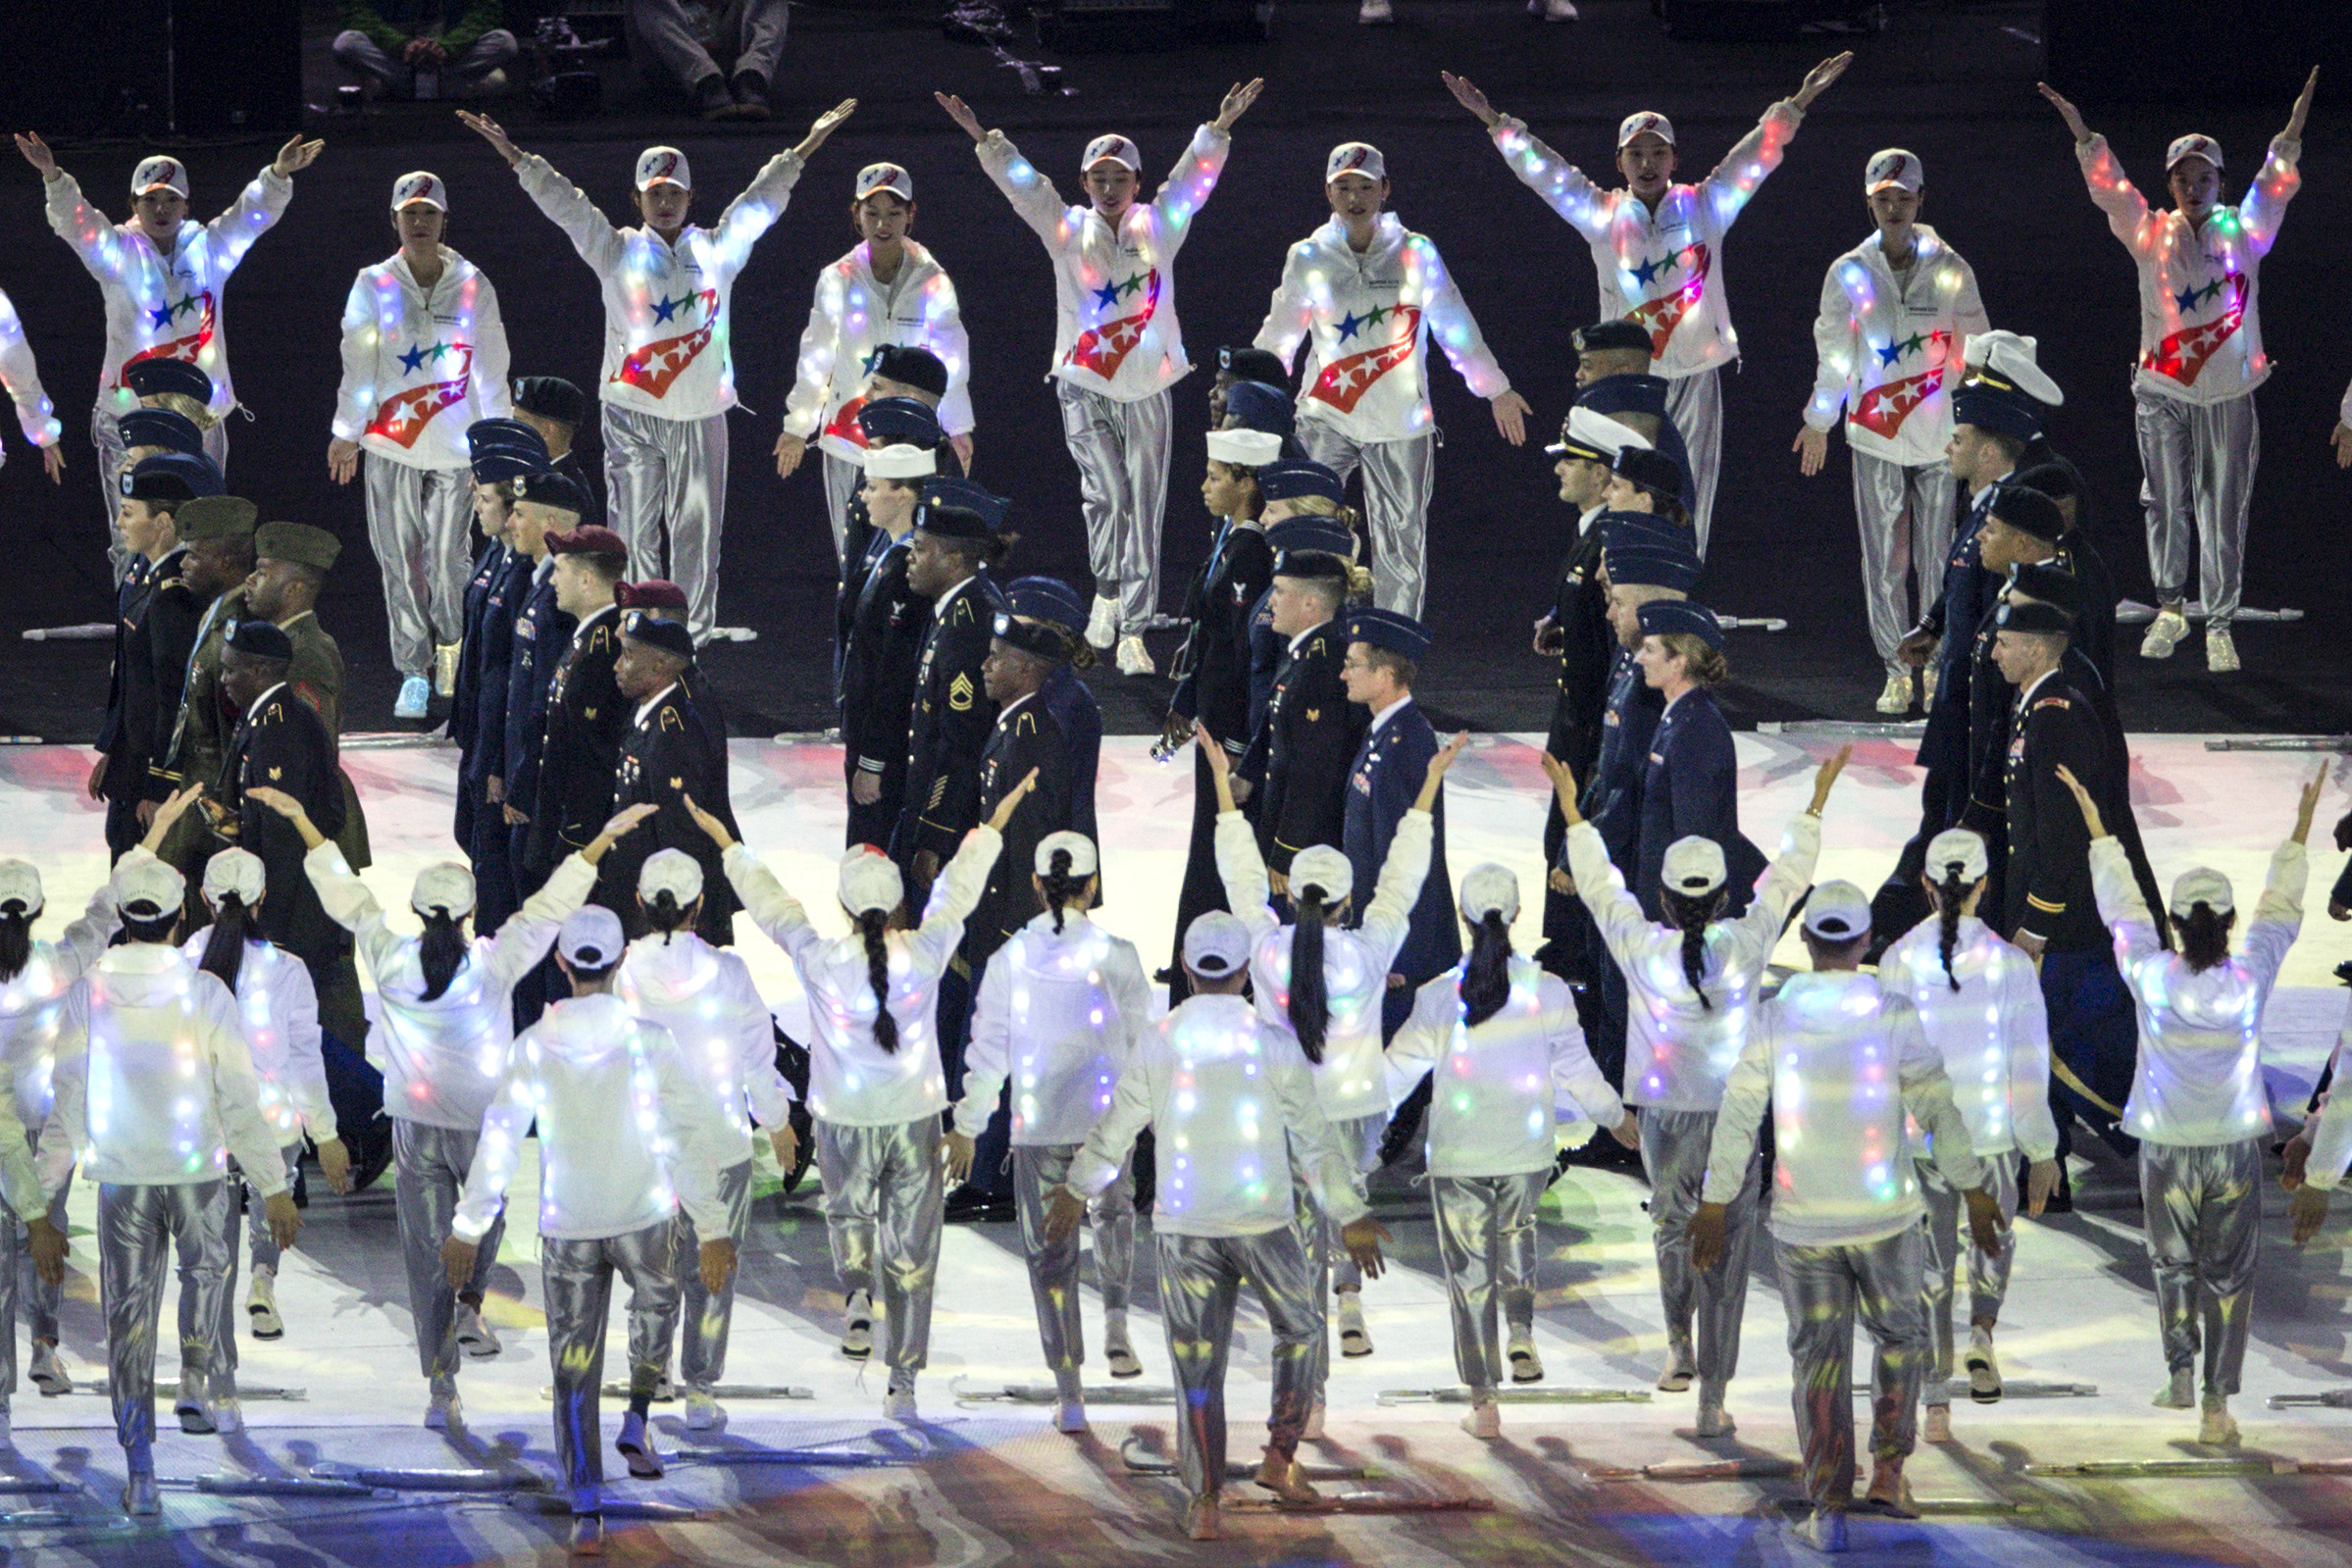 PHOTO: The delegation of United States enter the stadium during the opening ceremony of the 7th Military World Games on Oct. 18, 2019, in Wuhan, China.